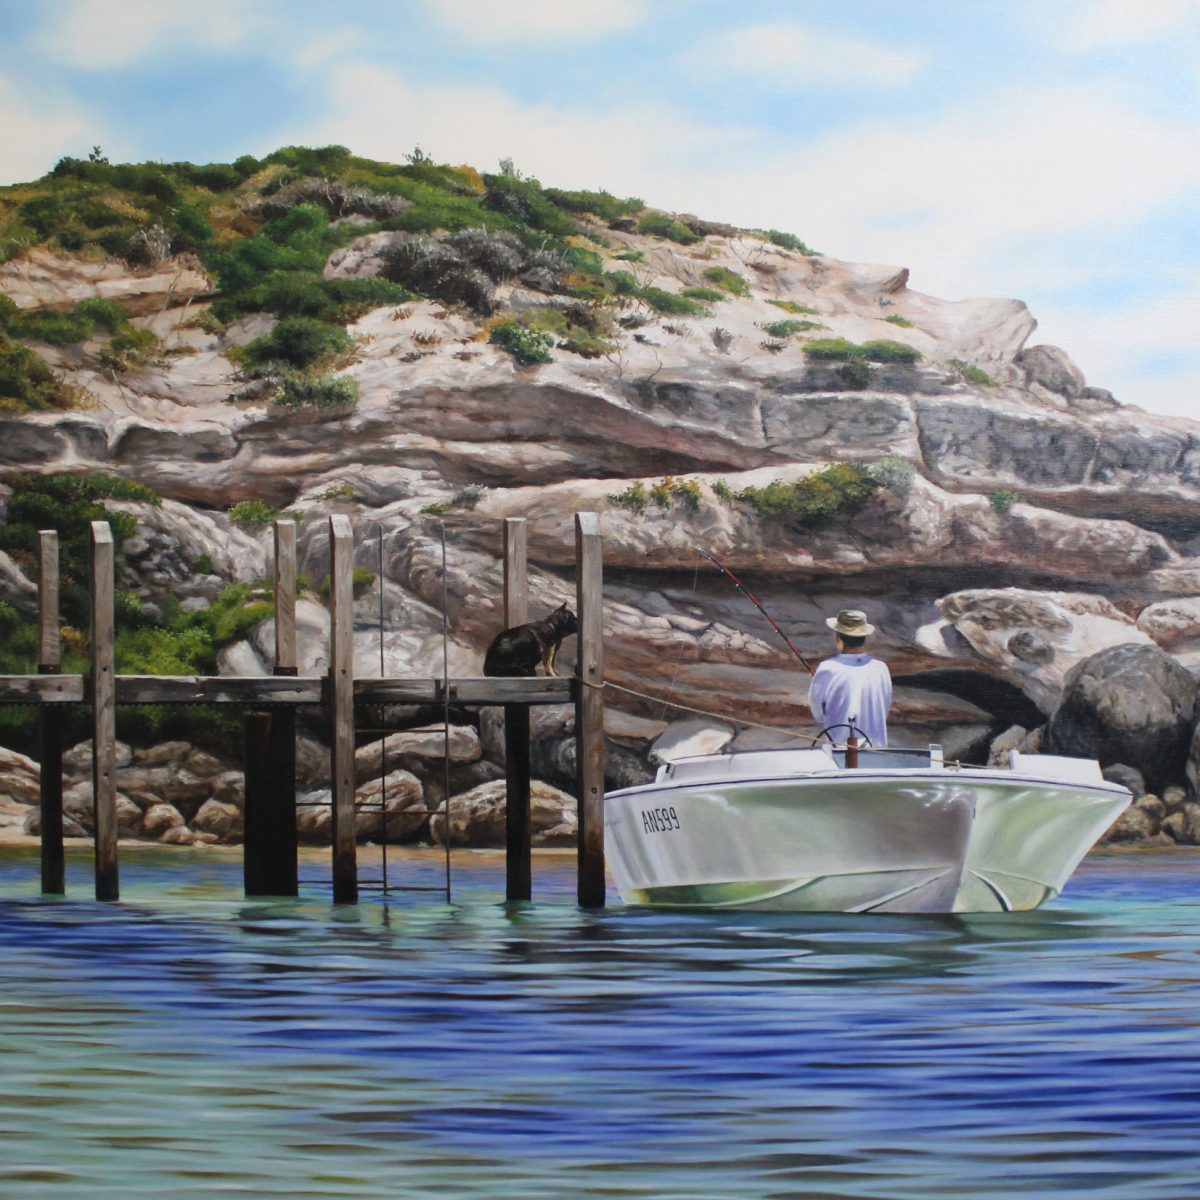 An original oil painting of the jetty at Gnarabup beach in Margaret river